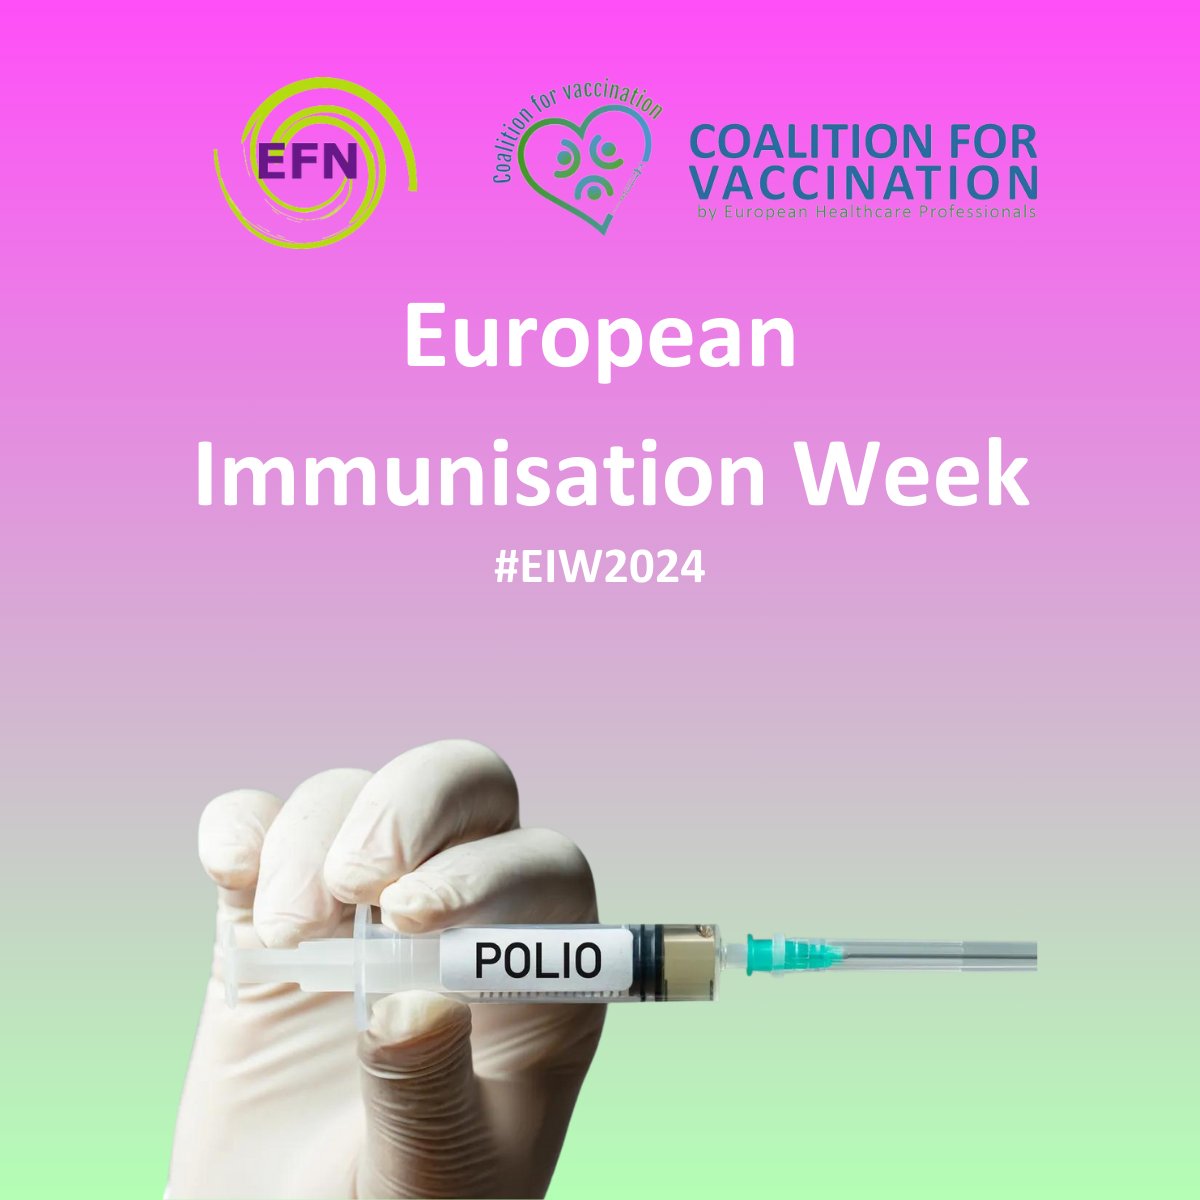 Polio is one of the original EPI vaccines. Europe has remained Polio free since 2002 thanks to the #Vaccine, but risks of resurgence persist. High vaccine coverage must be maintained! #EFN #EIW2024 #Nurses #Prevention #Longlifeforall #EPI #Polio #vaccination #UnitedInProtection